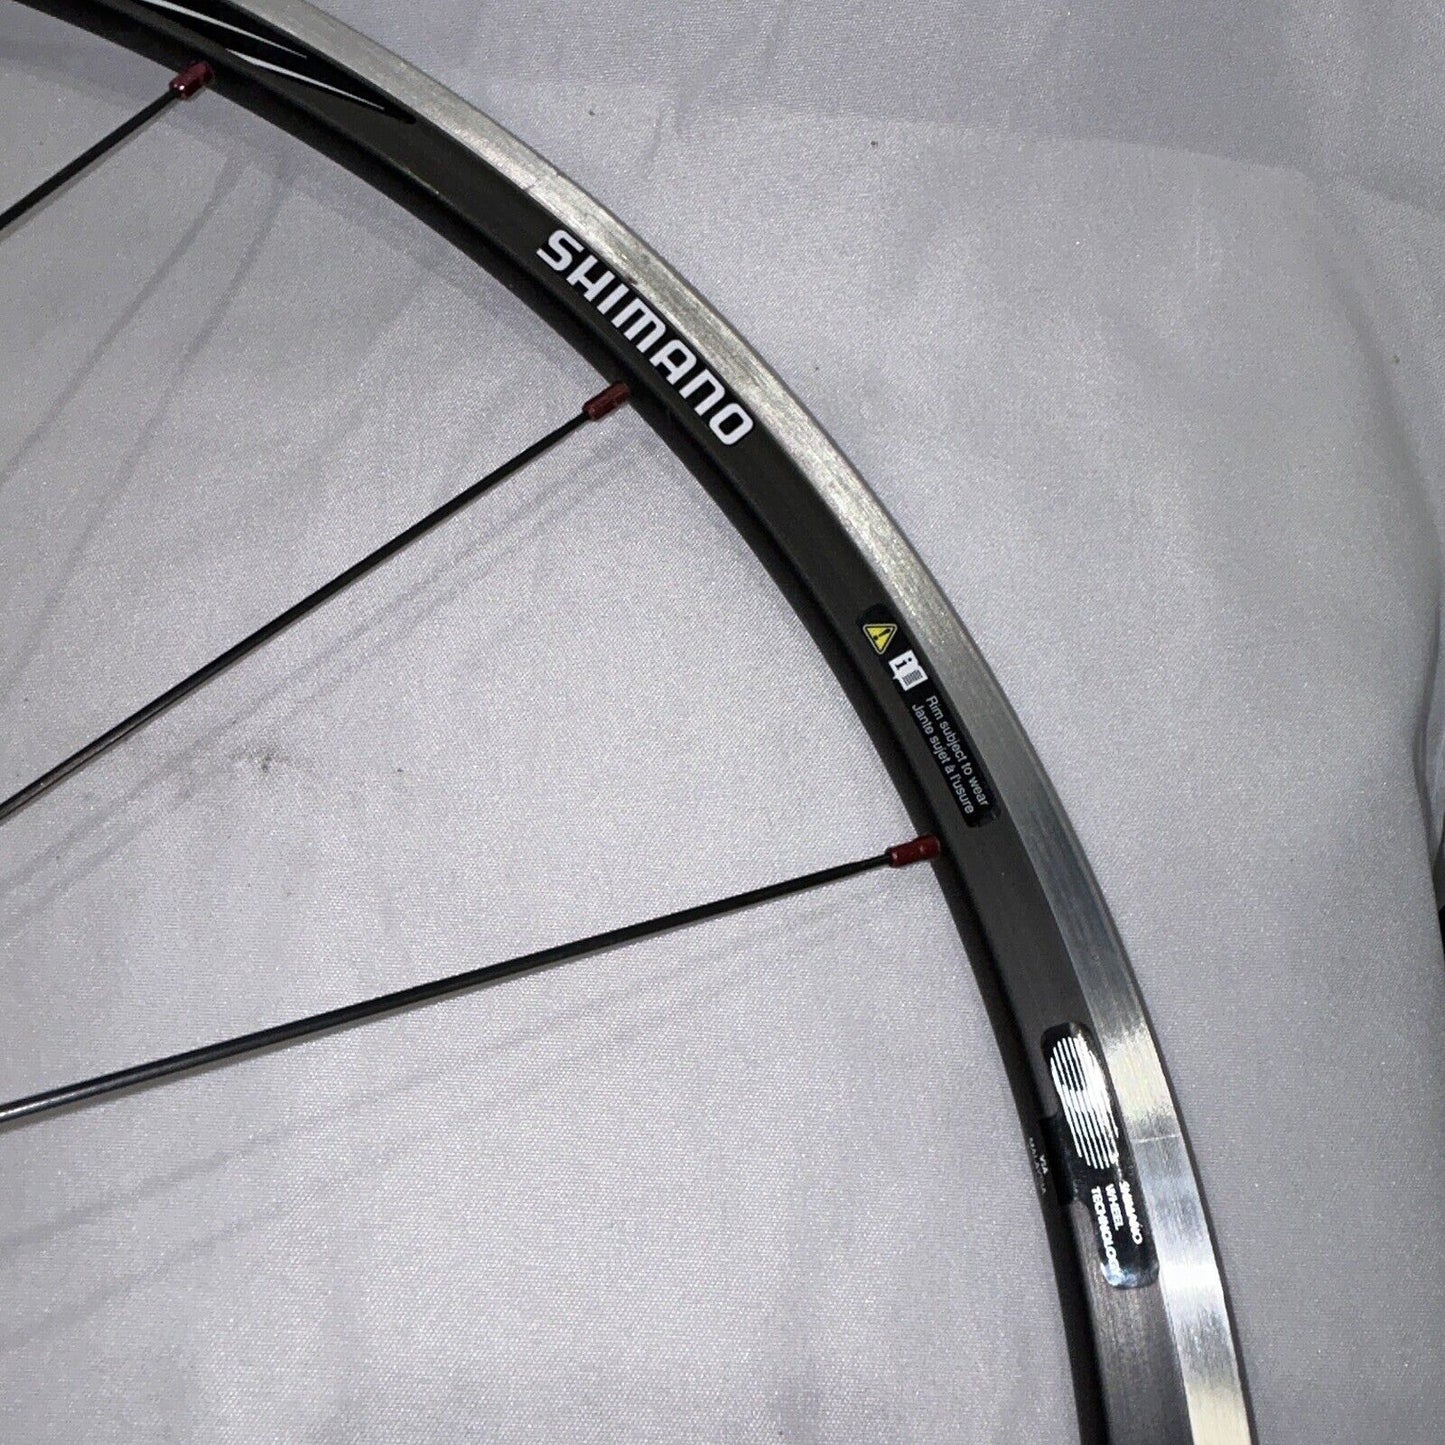 Shimano WH-RS10 Black Alloy Rim Brake Wheelset 8 9 and 10 Speed Shimano Pre own